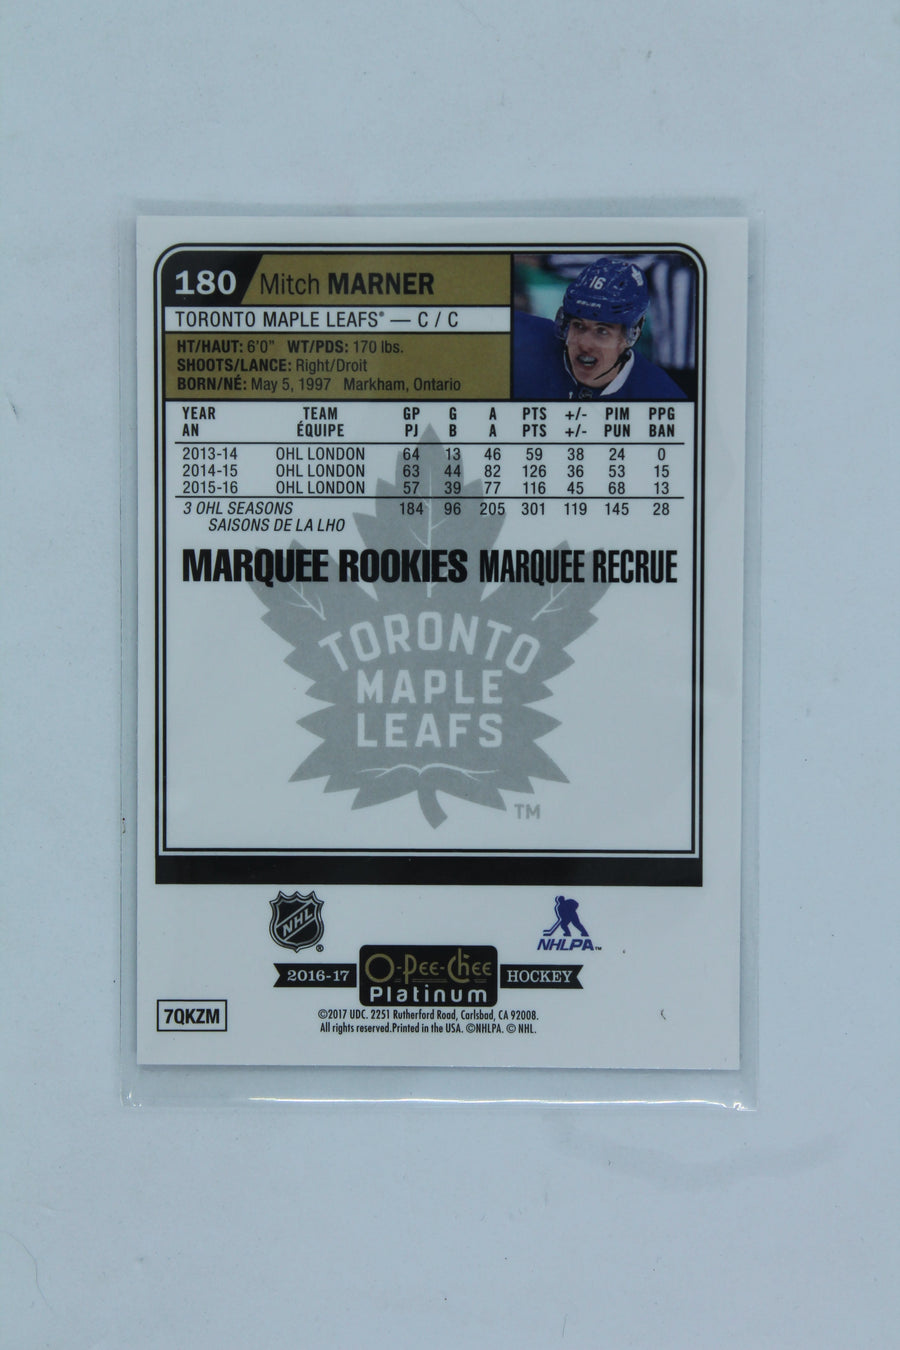 Mitch Marner 2016-17 O-Pee-Chee Platinum Marquee Rookies Rookie Card